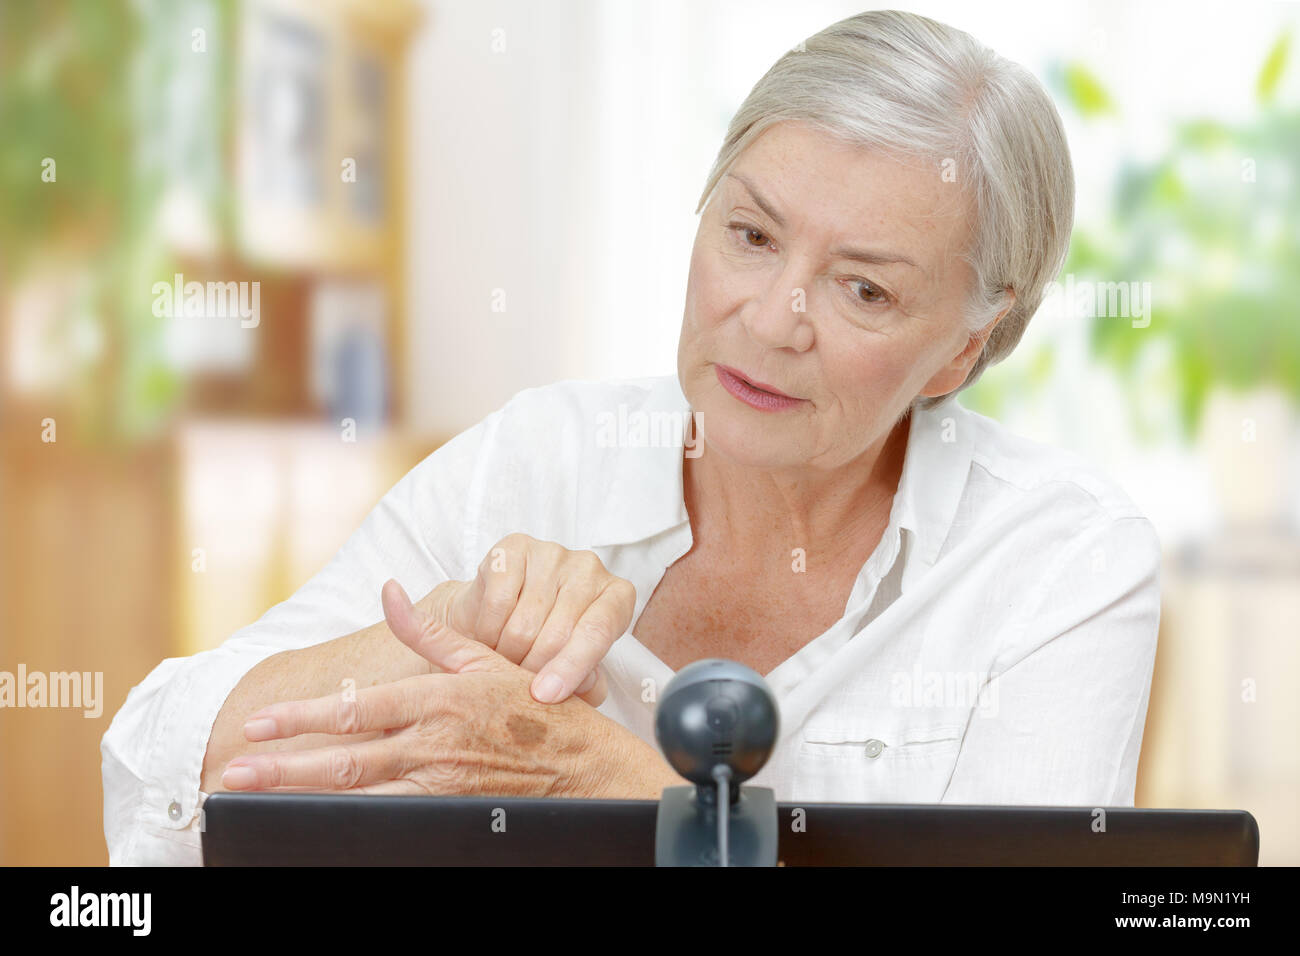 Senior woman in front of a computer monitor with an attached camera showing her doctor a mole on her hand during video call, telemedicine concept Stock Photo